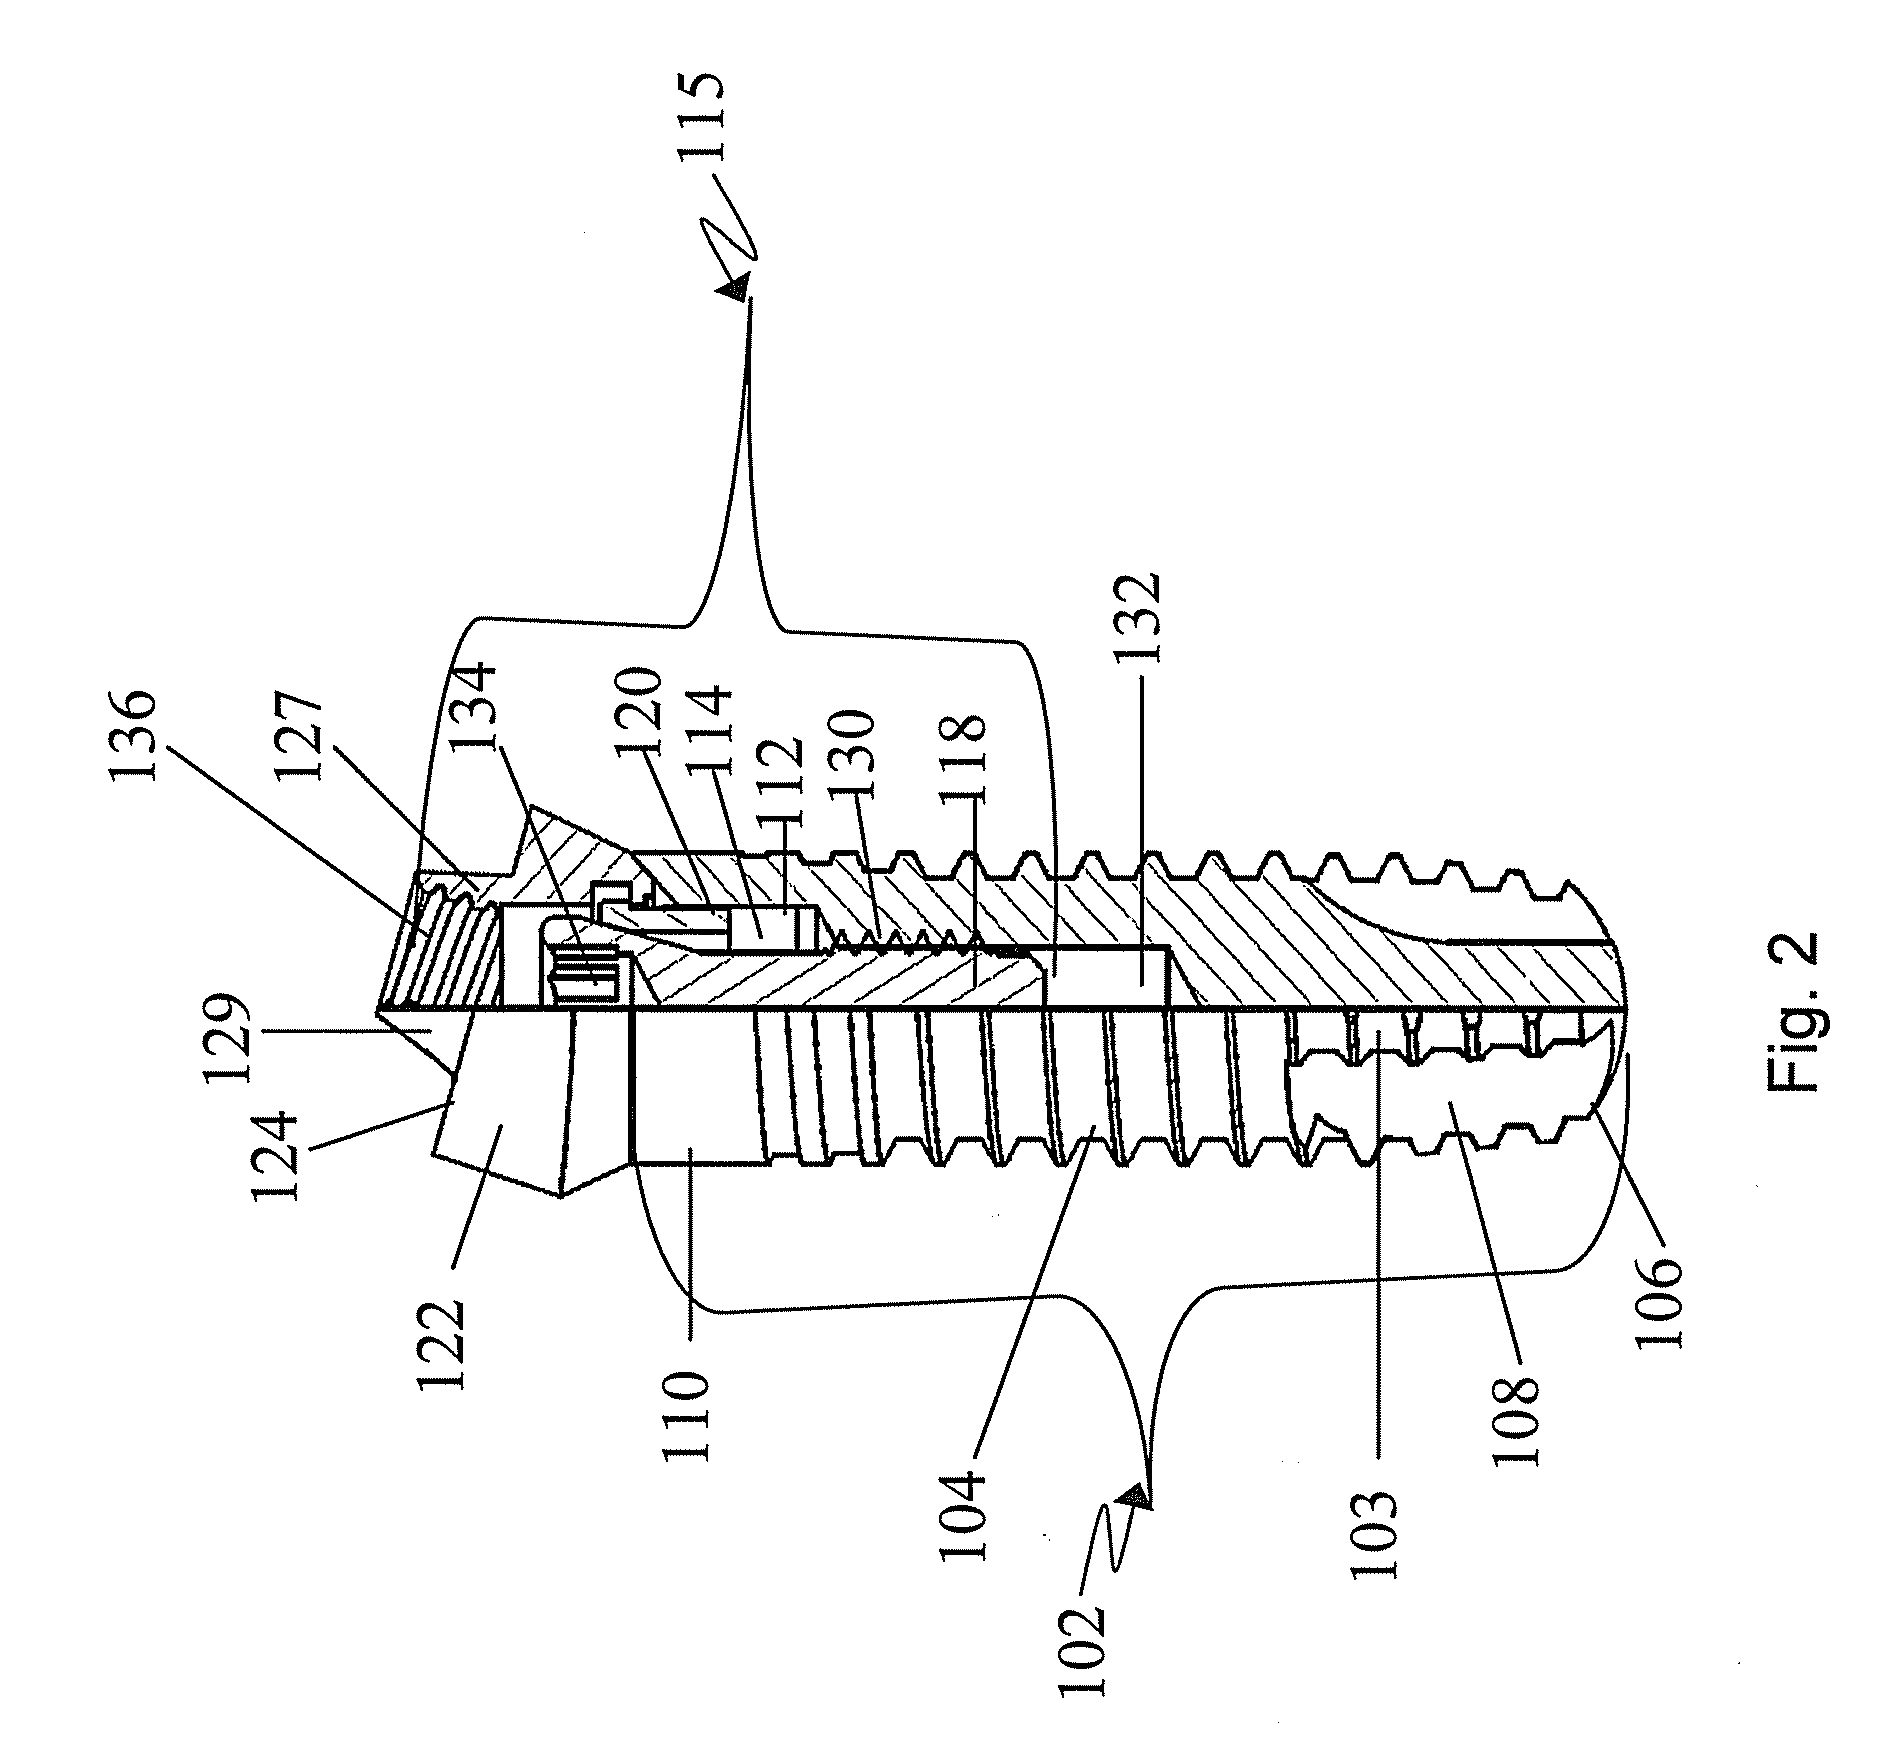 Inclined dental abutment assembly device